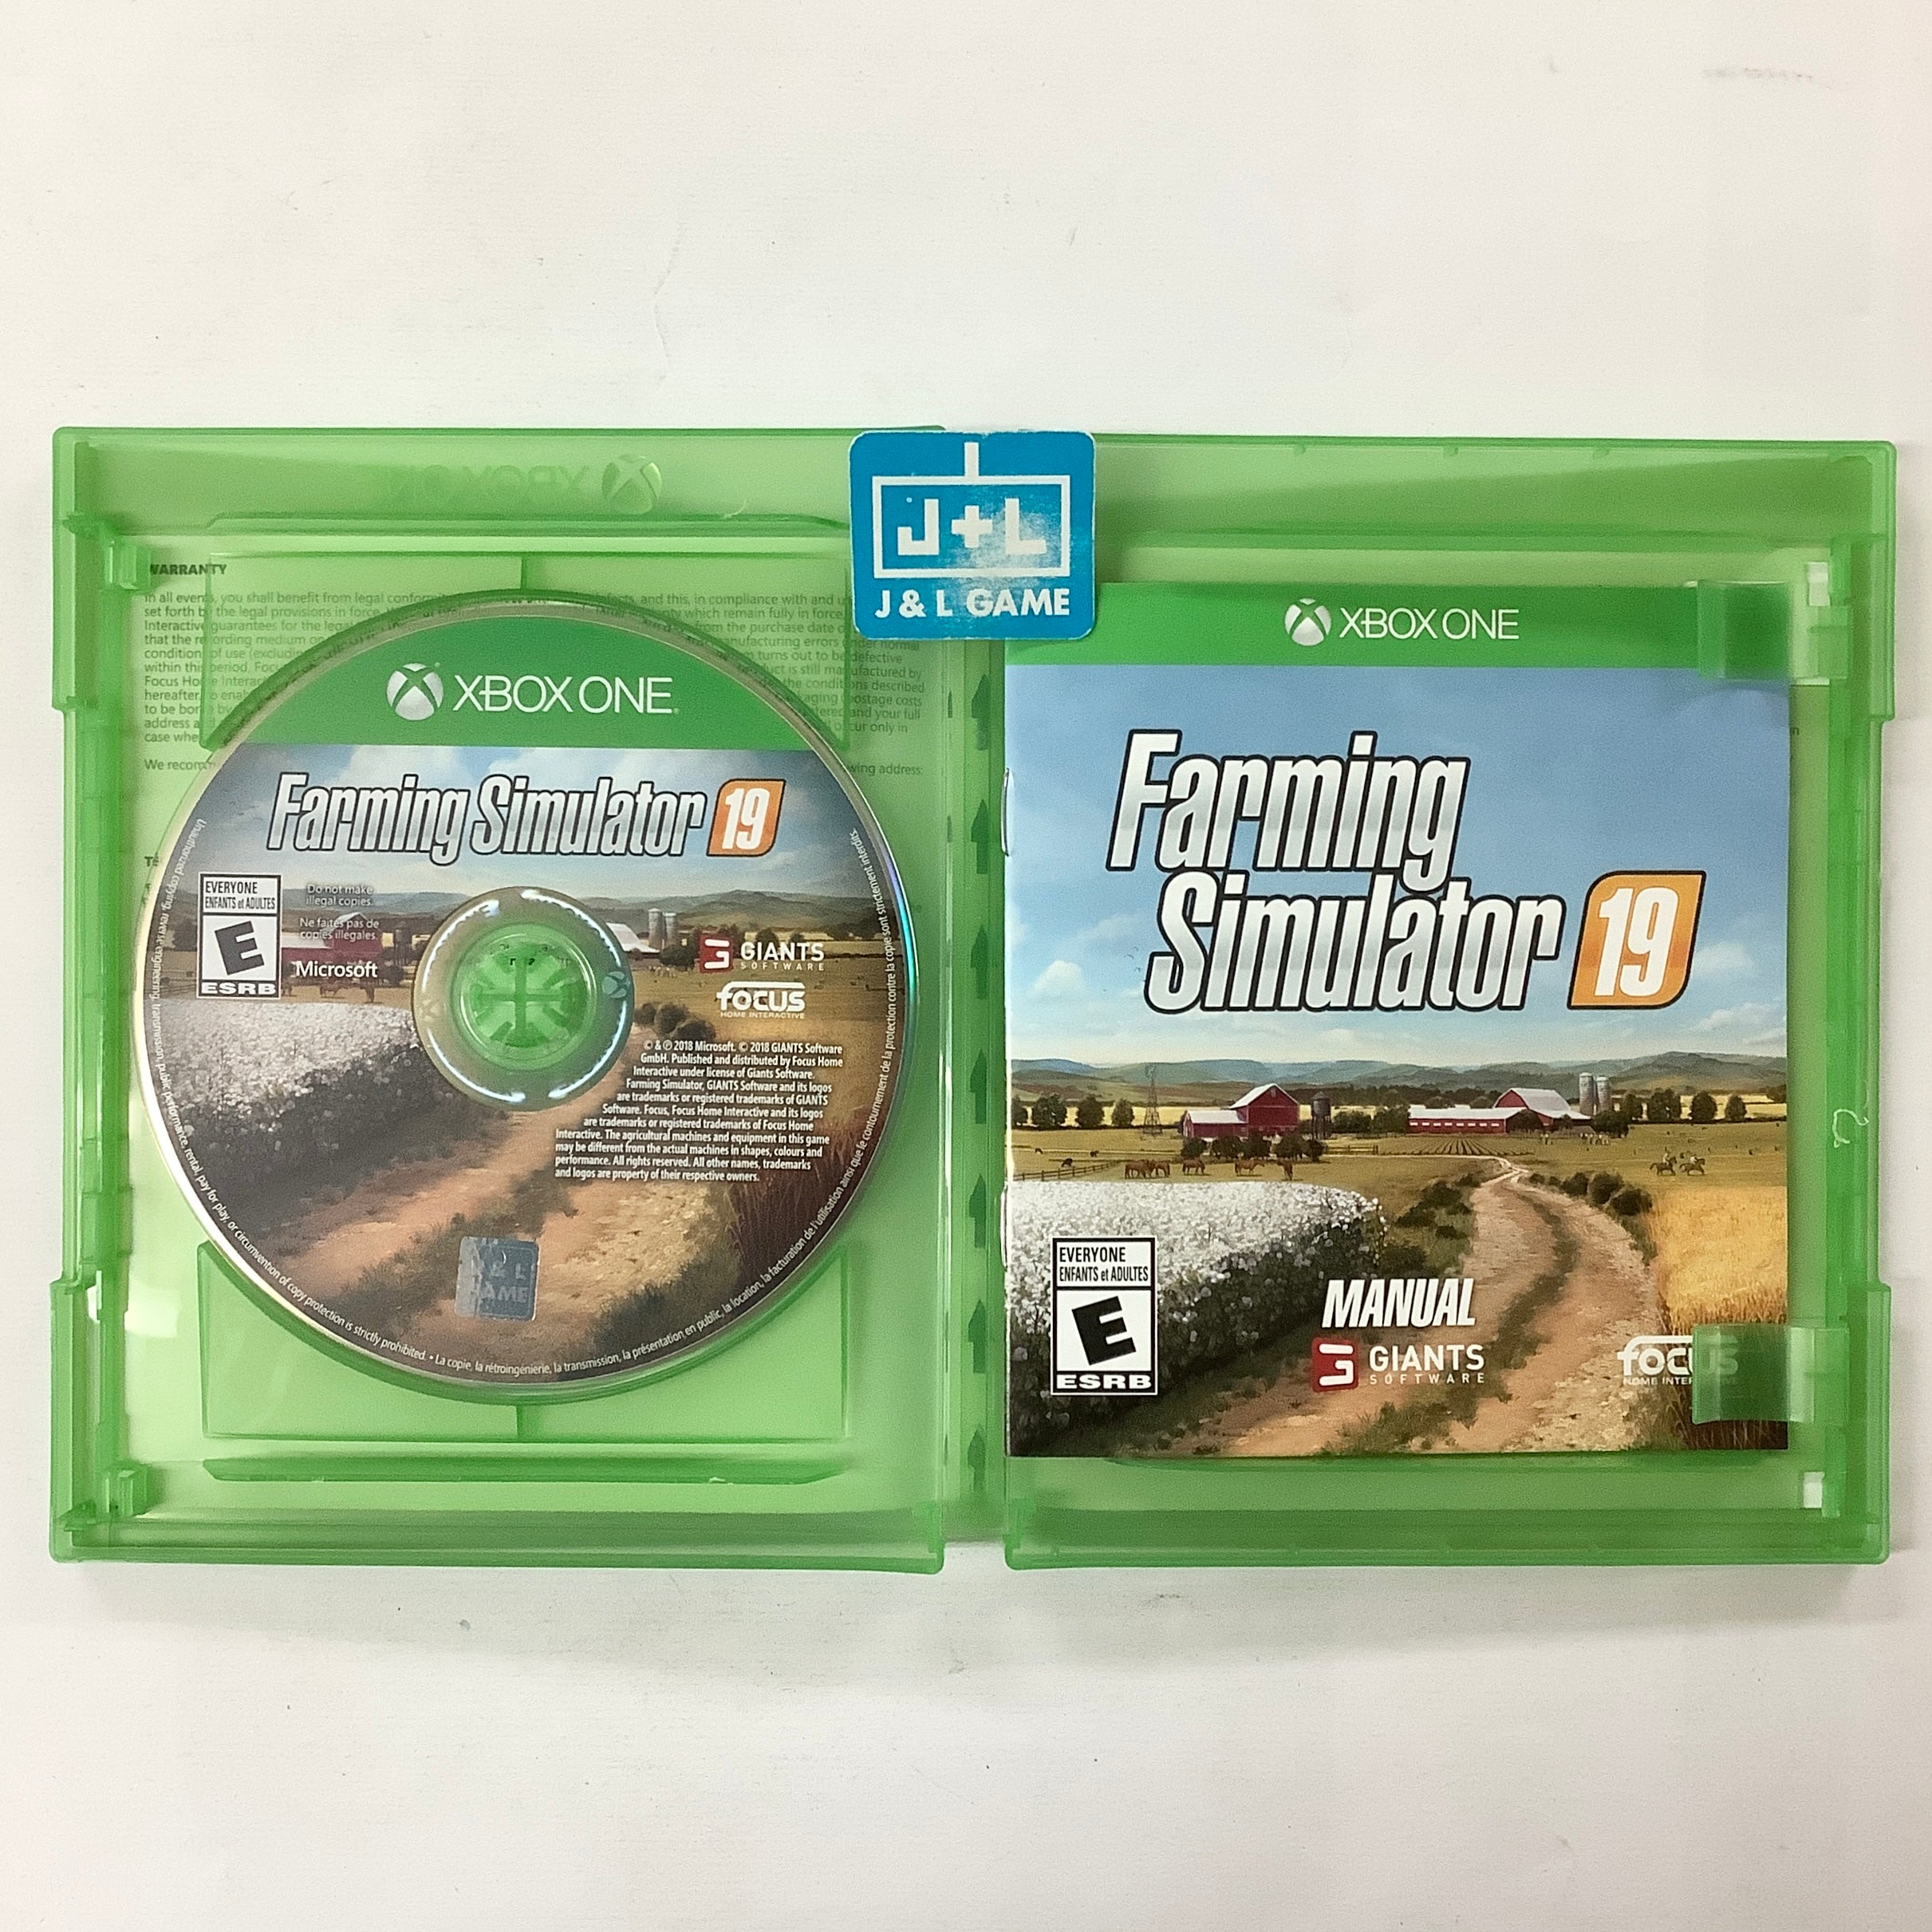 Farming Simulator 19 - Xbox One [Pre-Owned] Video Games Focus Home Interactive   